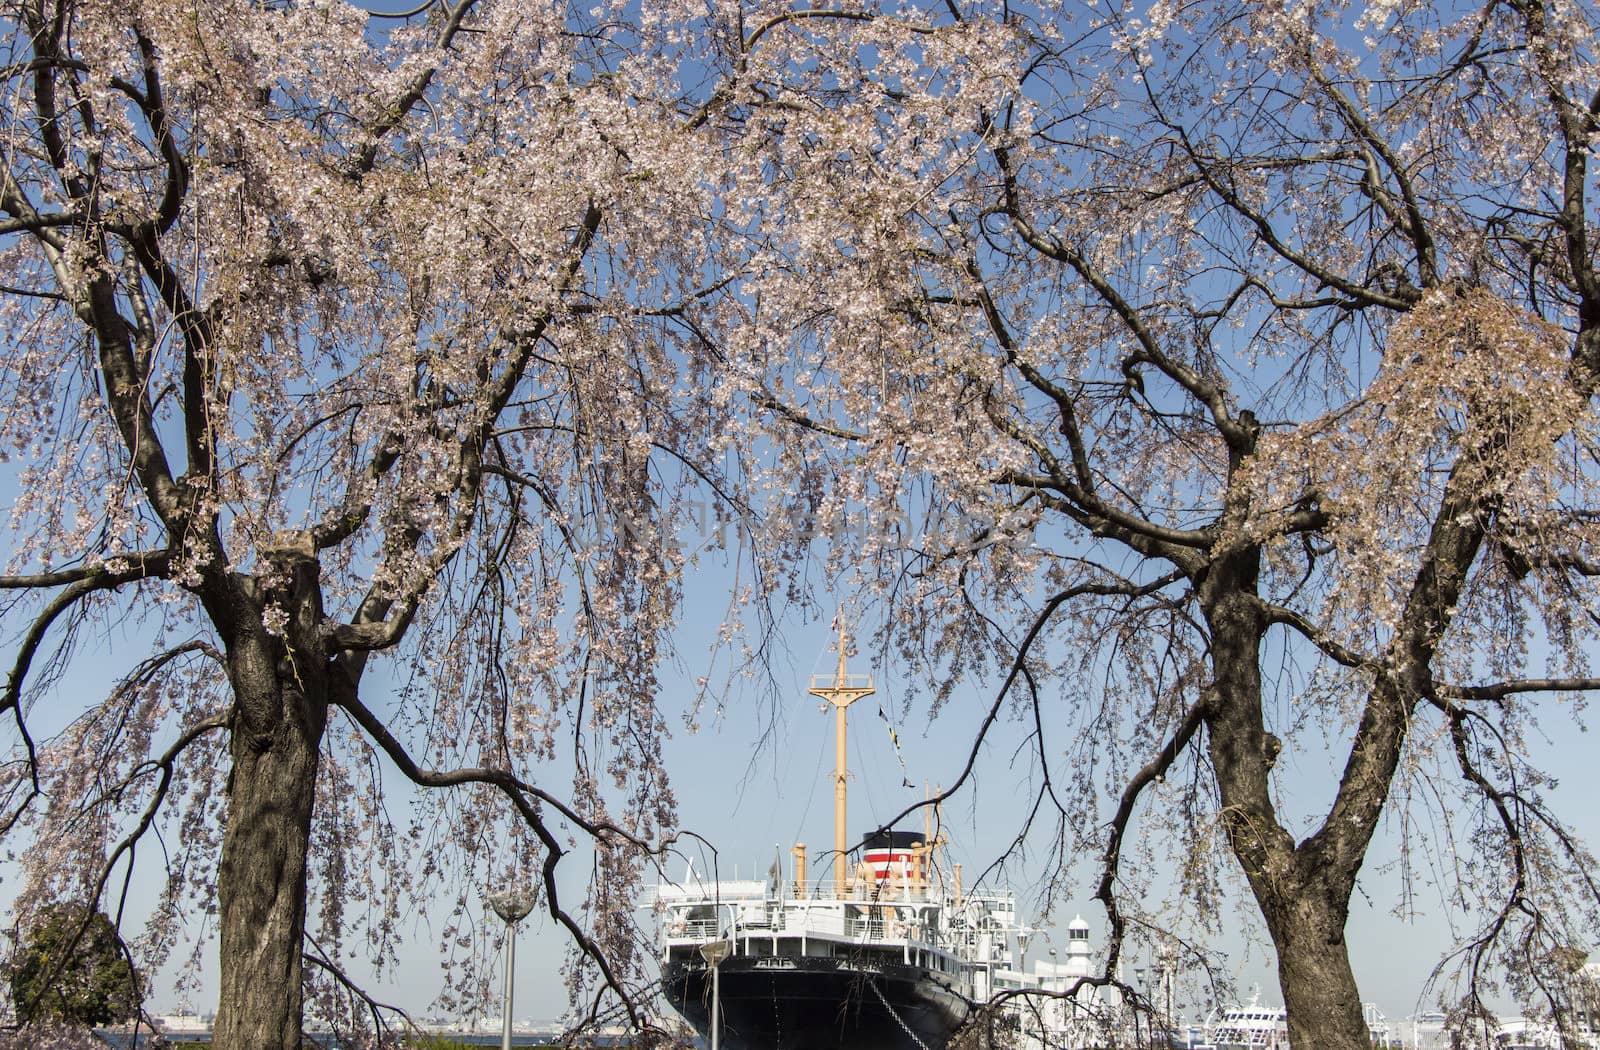 ship and cherry blossom flowers on a spring day